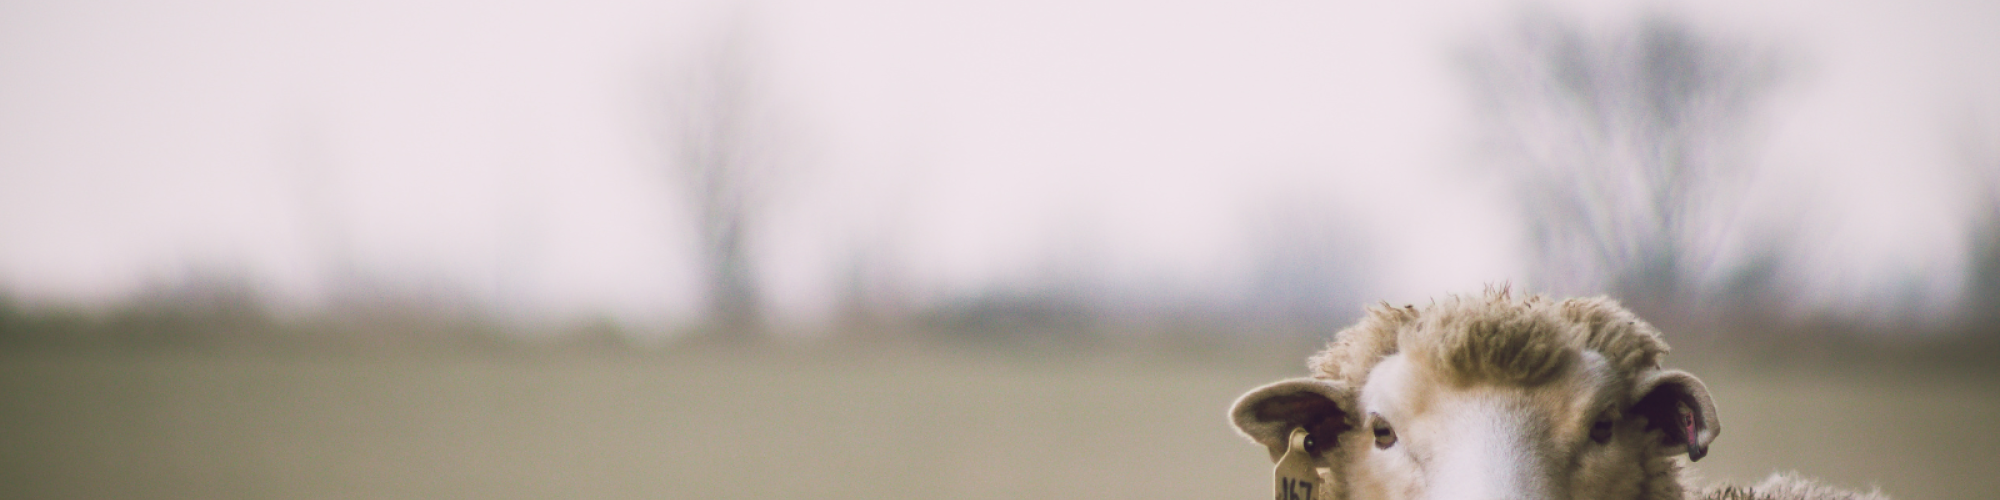 A sheep staring into the camera with a blurry landscape behind. Photo by Dan Hamill via Pexels.